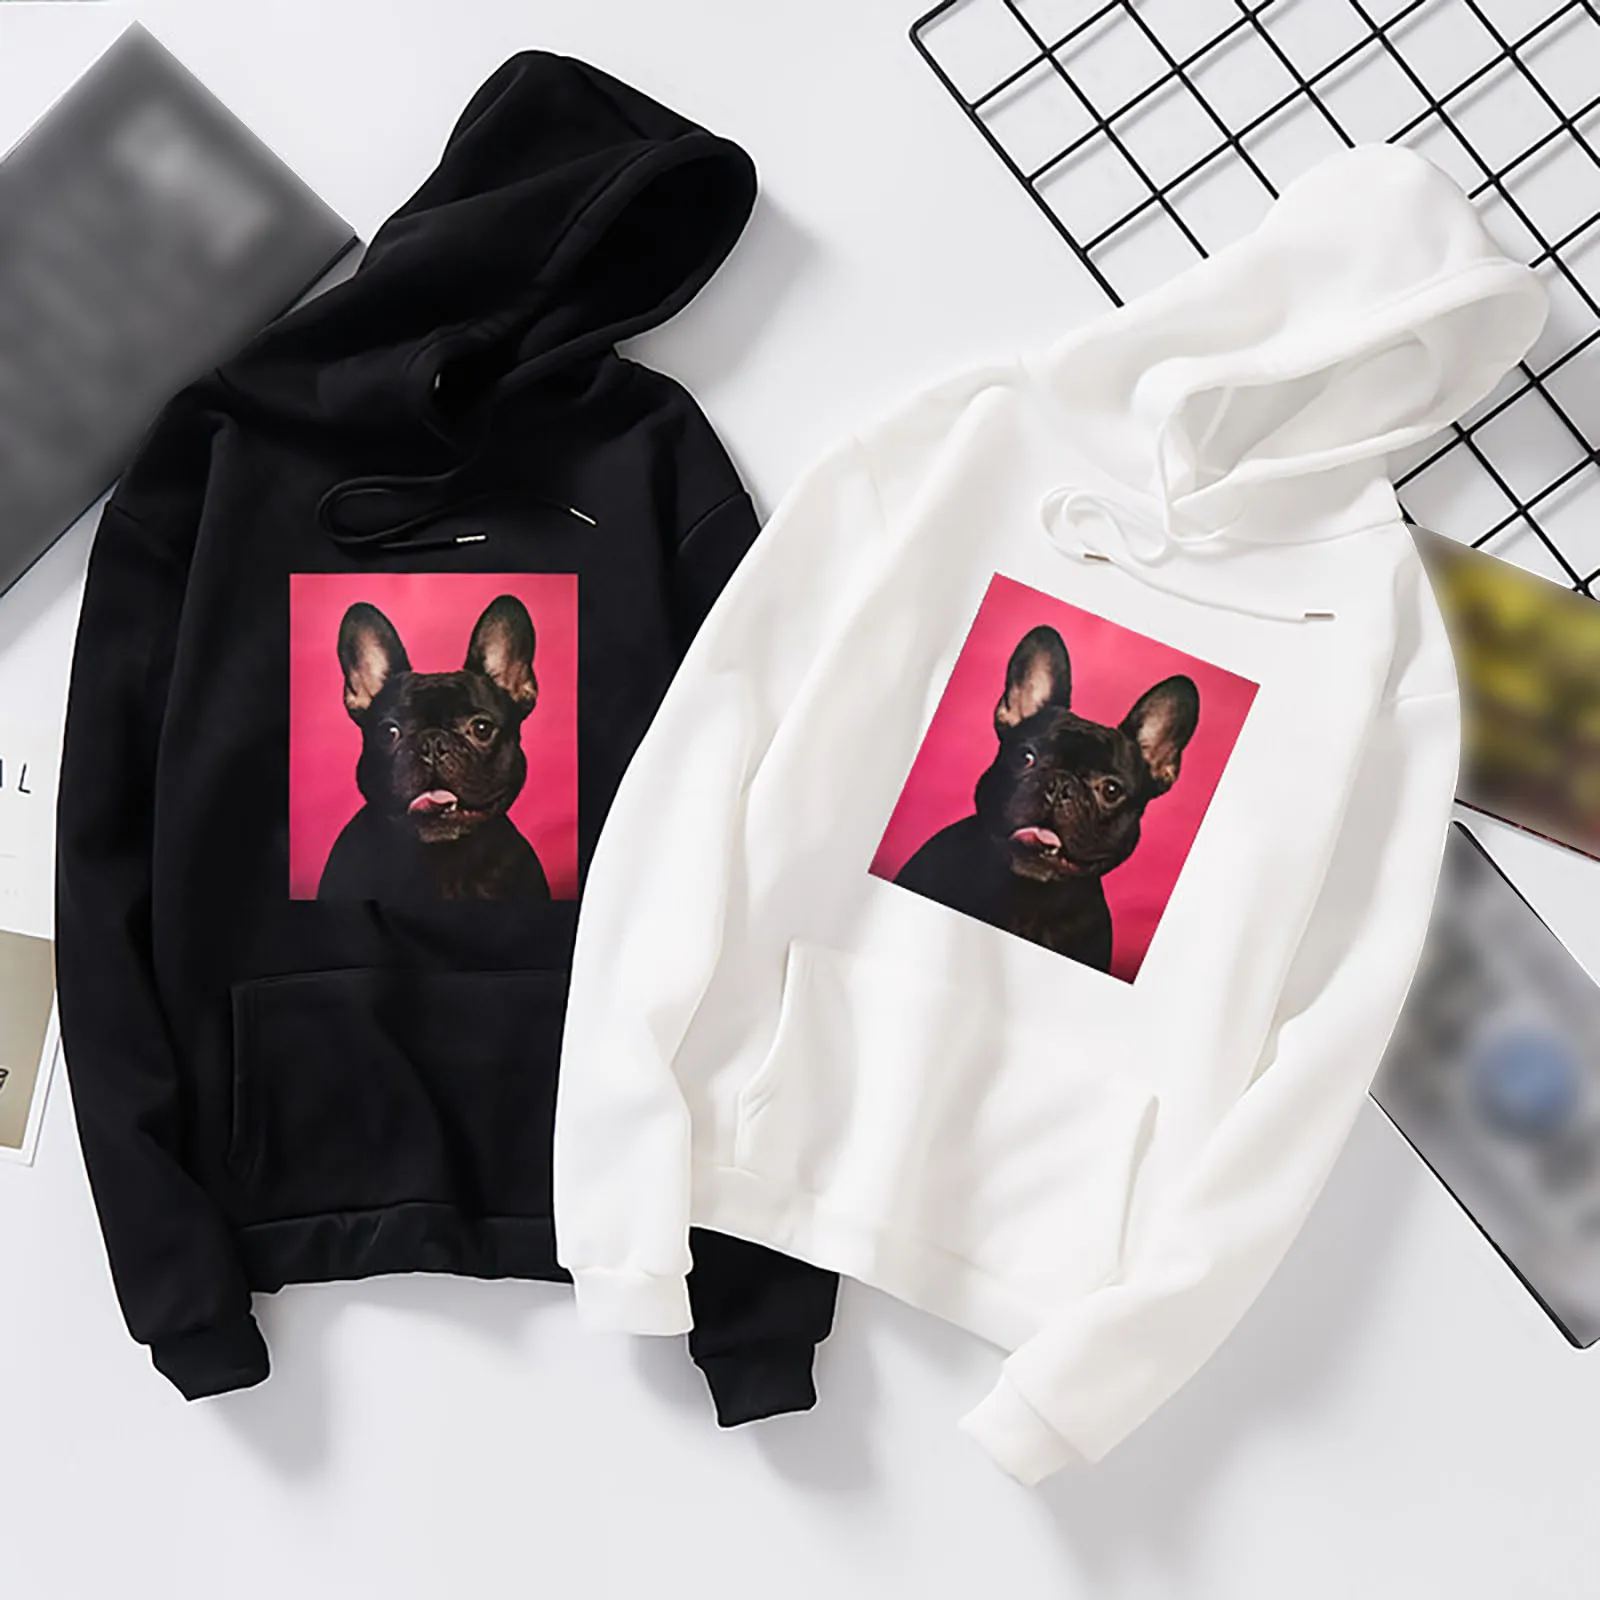 Funny Hoodies Womens Sweatshirt Oversize Ugly Black French Bulldog Hooded Pullover Y2k Harajuku Korean Sweater Unisex Couple Top autumn winter down coats jacket women casual korean style oversize solid color hoodies fashion cotton black jackets parkas